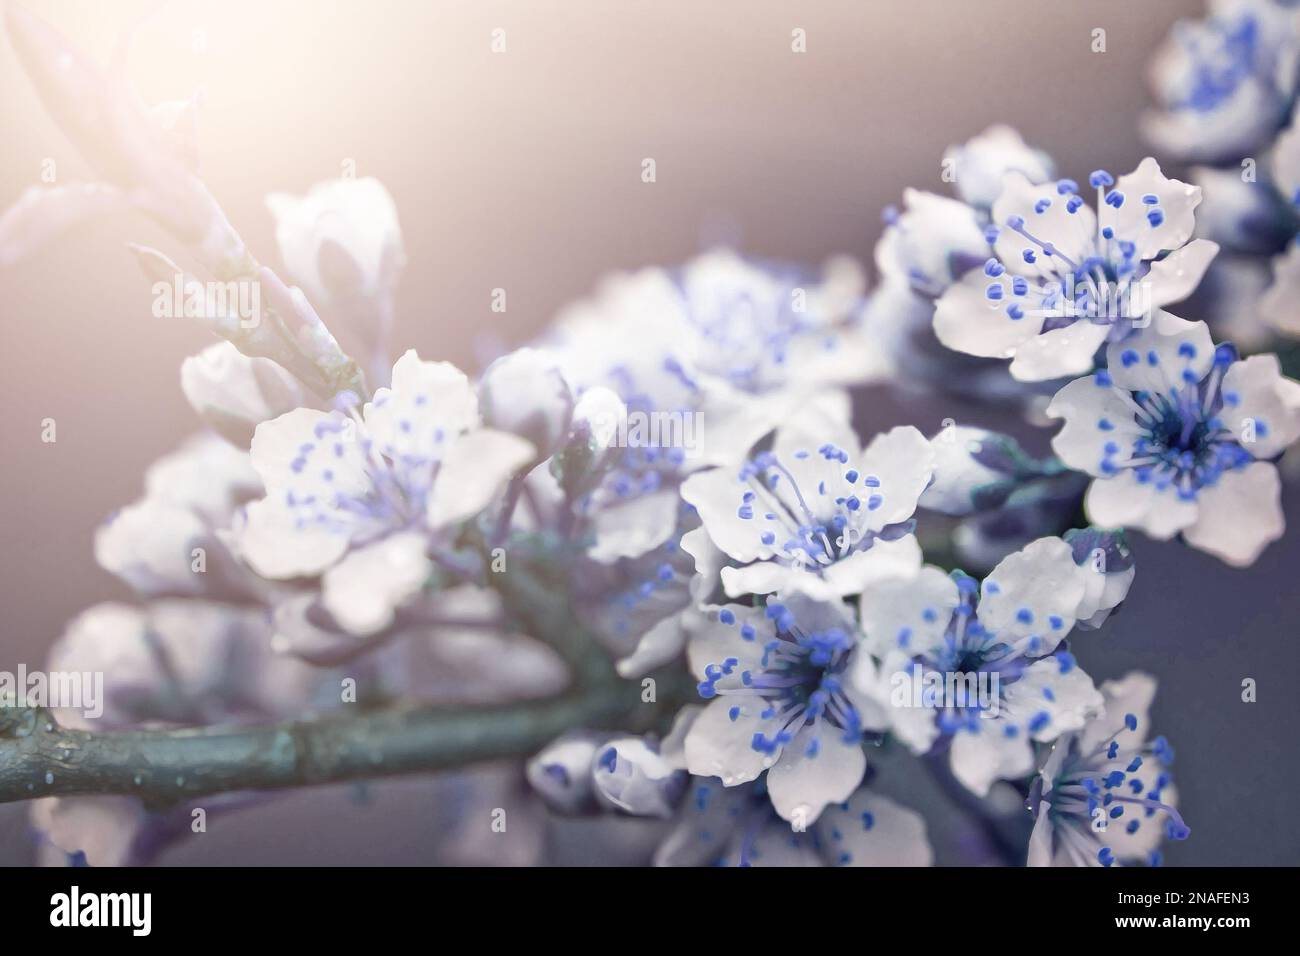 Flowers of Cherry plum or Myrobalan Prunus cerasifera blooming in spring on the branches at Sunrise on light blue and violet background macro. Amazing Stock Photo